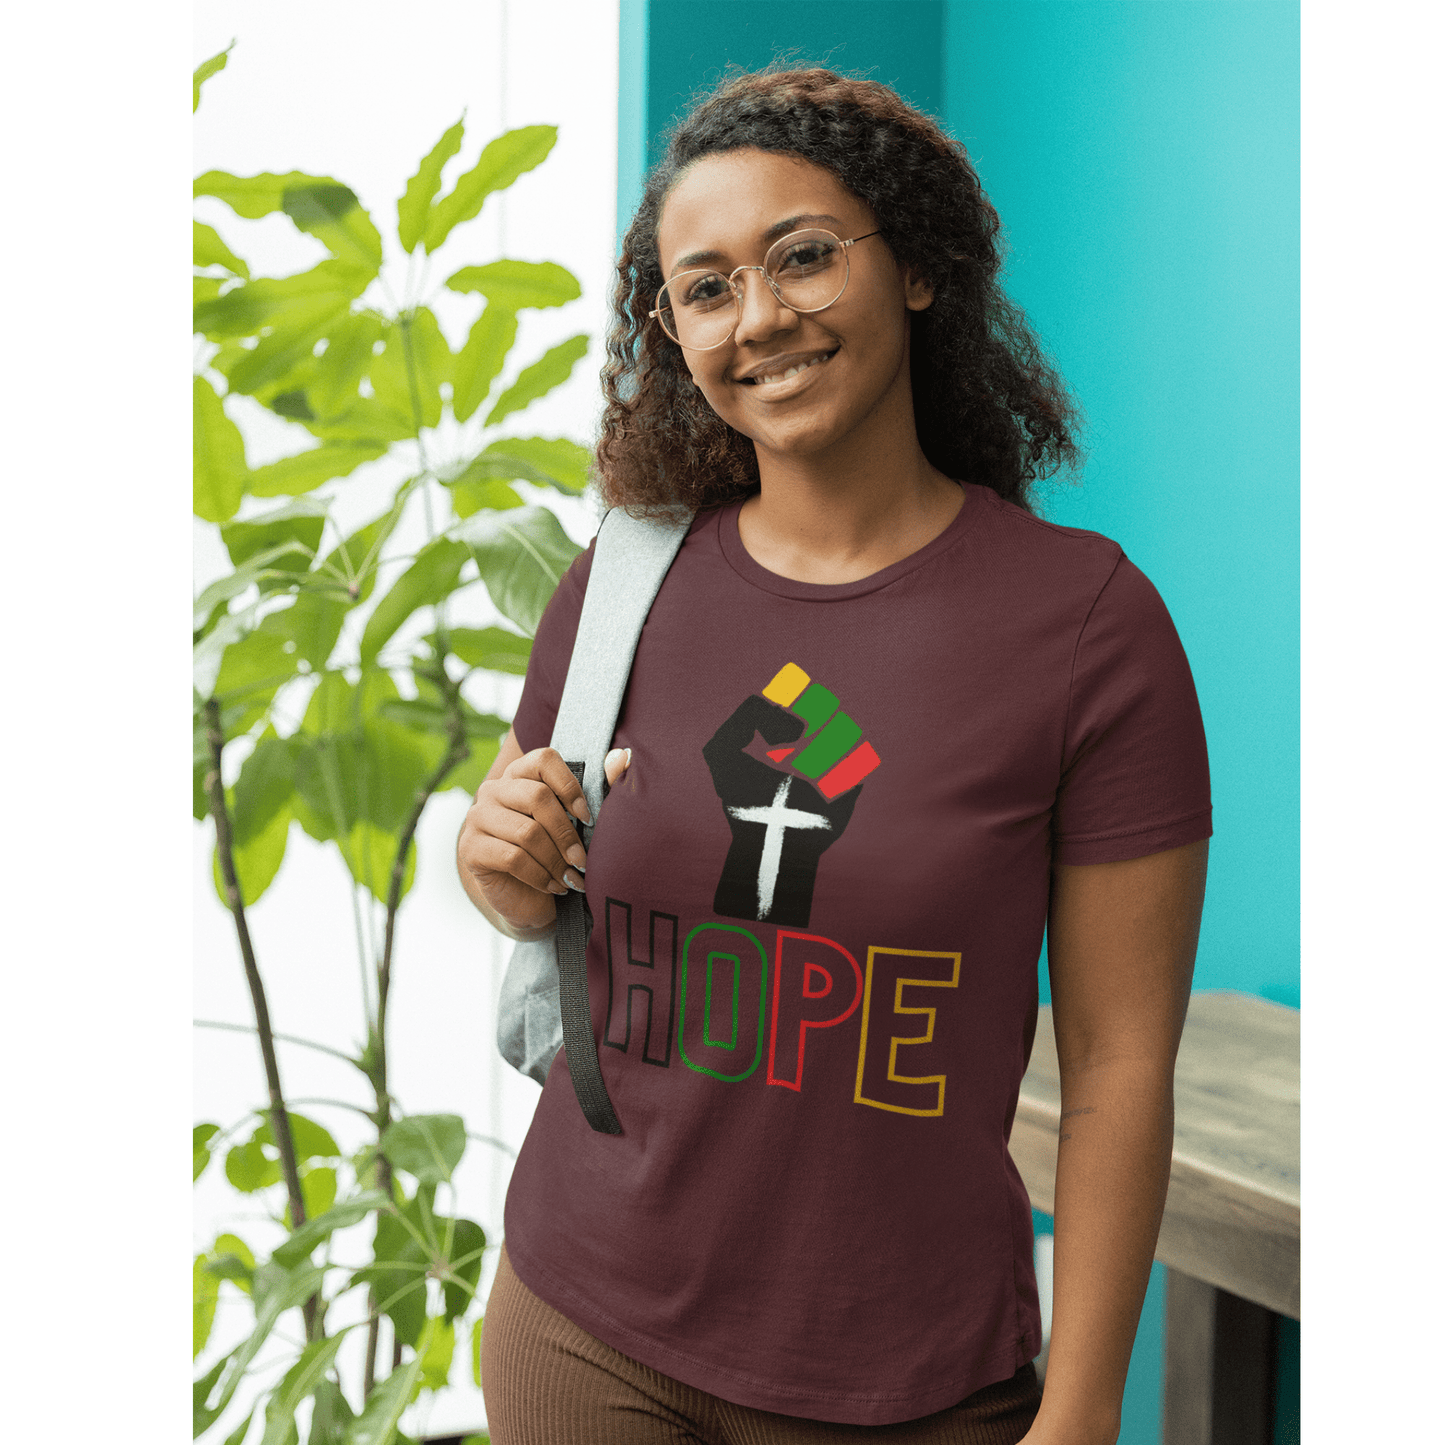 HOPE Faith and Empowerment (Graphic Colorful Text and Empowerment Hand) Unisex Jersey Short Sleeve Tee - Style: Bella+Canvas 3001